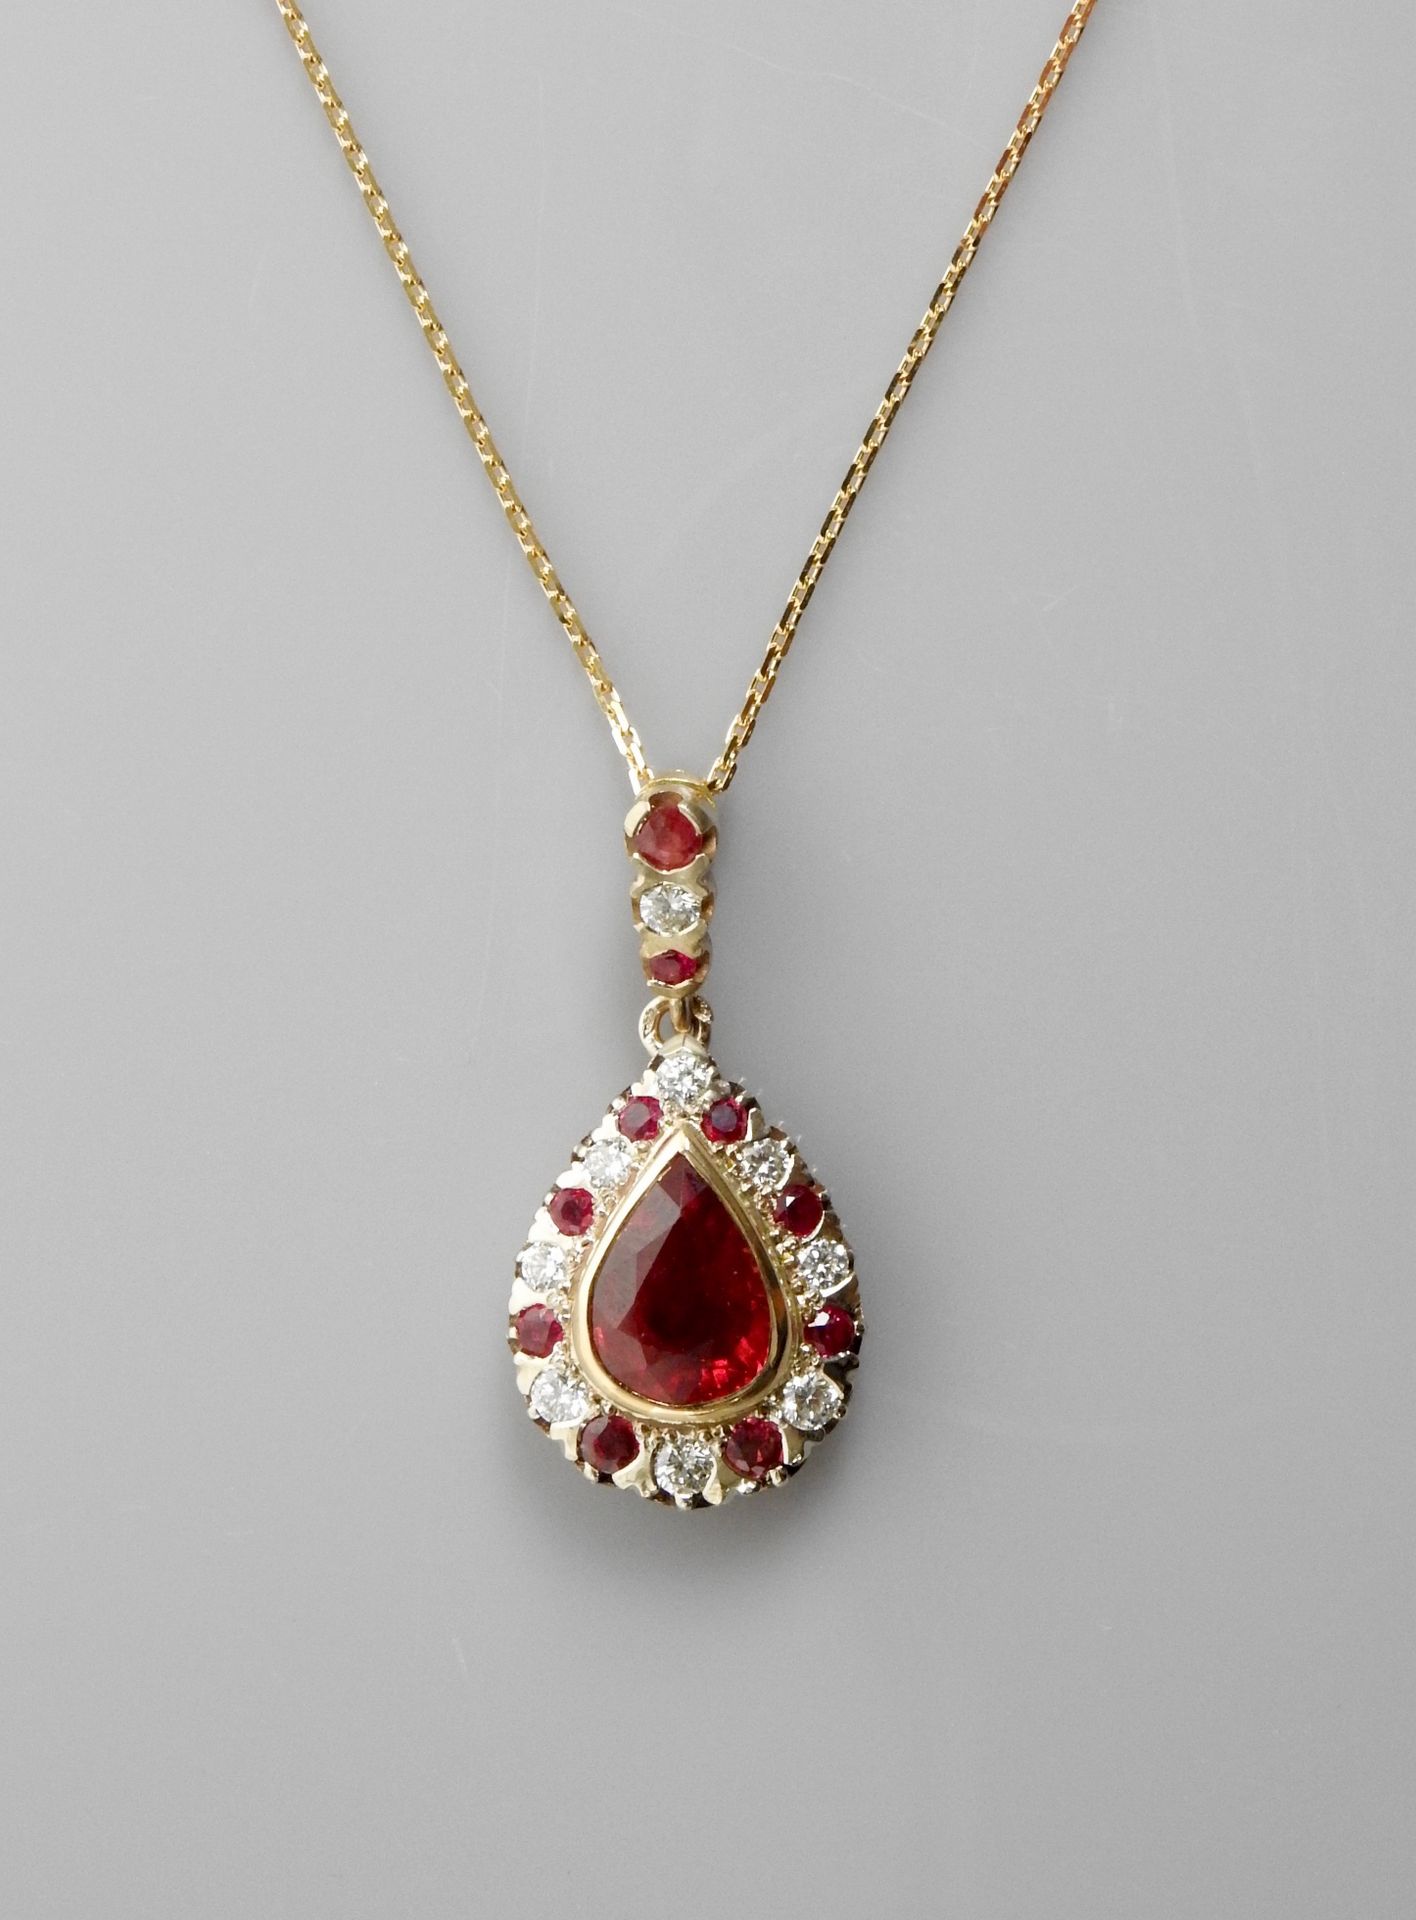 Null Chain and pendant in two golds, 750 MM, set with a pear-cut ruby weighing 3&hellip;